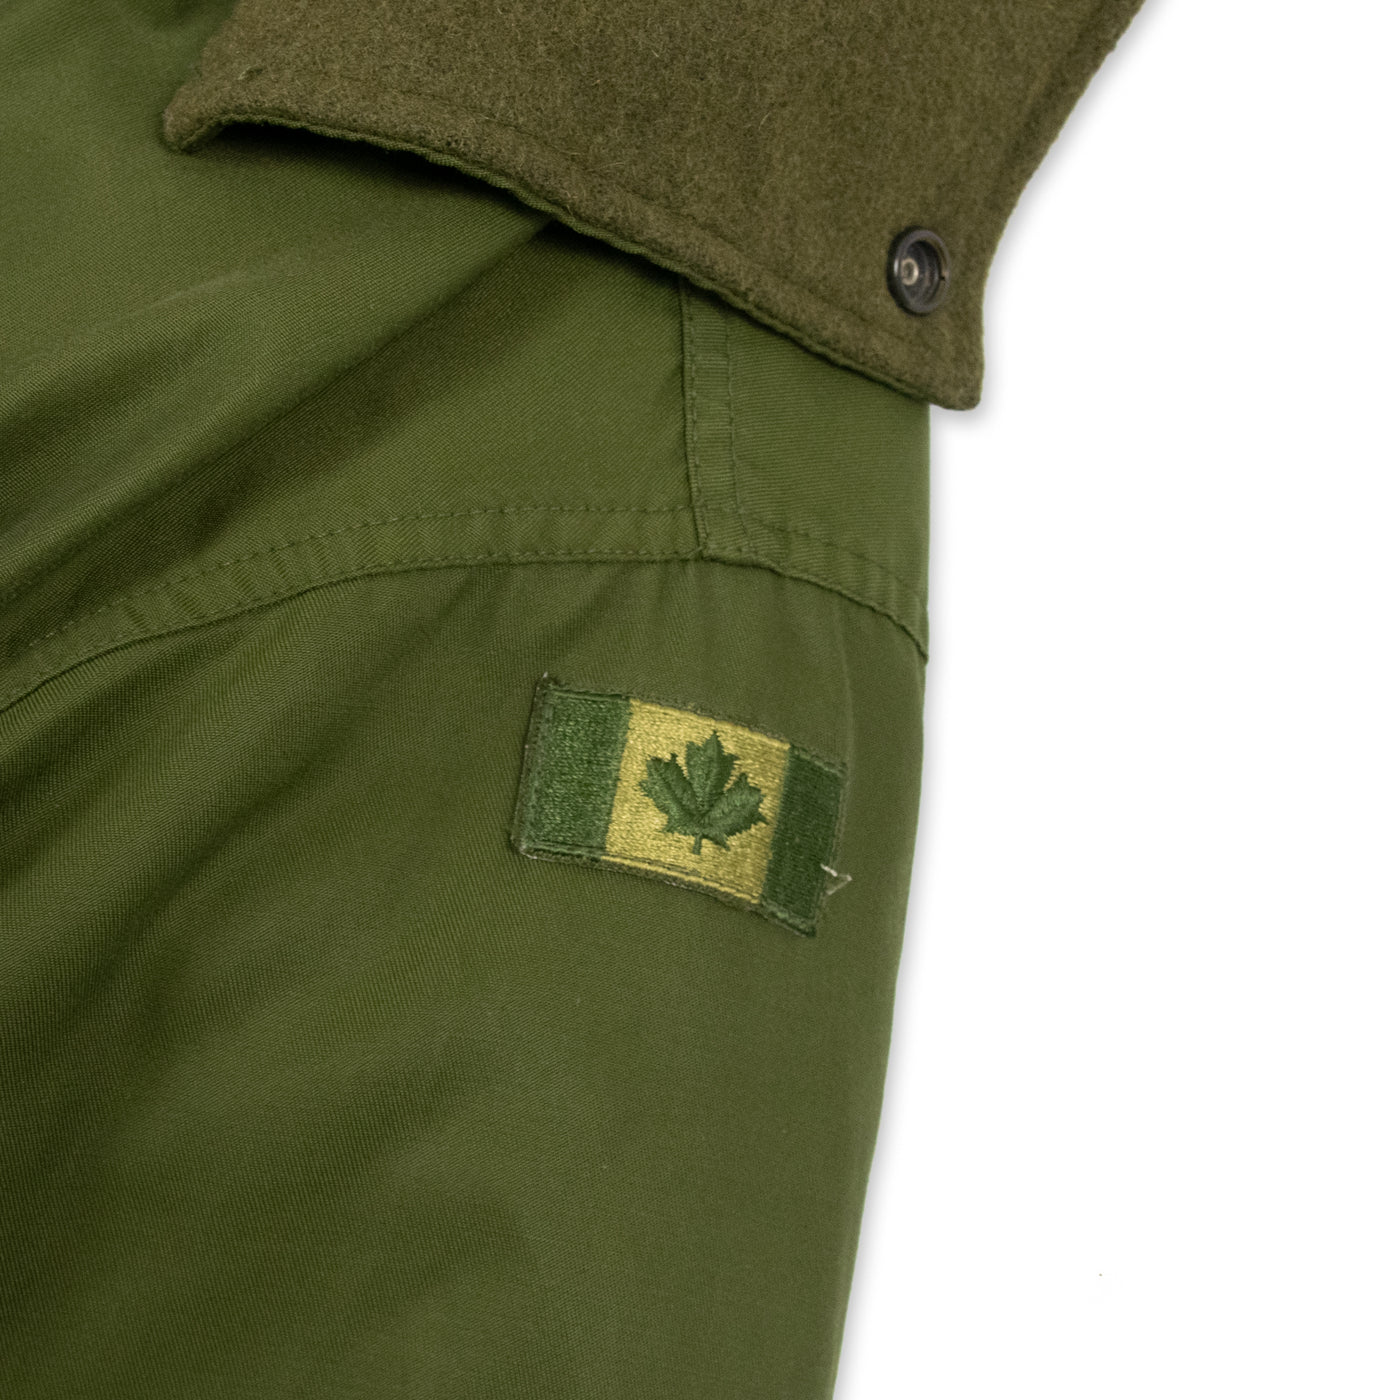 Canadian Army Arctic Winter Parka Heavy Duty Jacket Olive Green L Regular FLAG PATCH